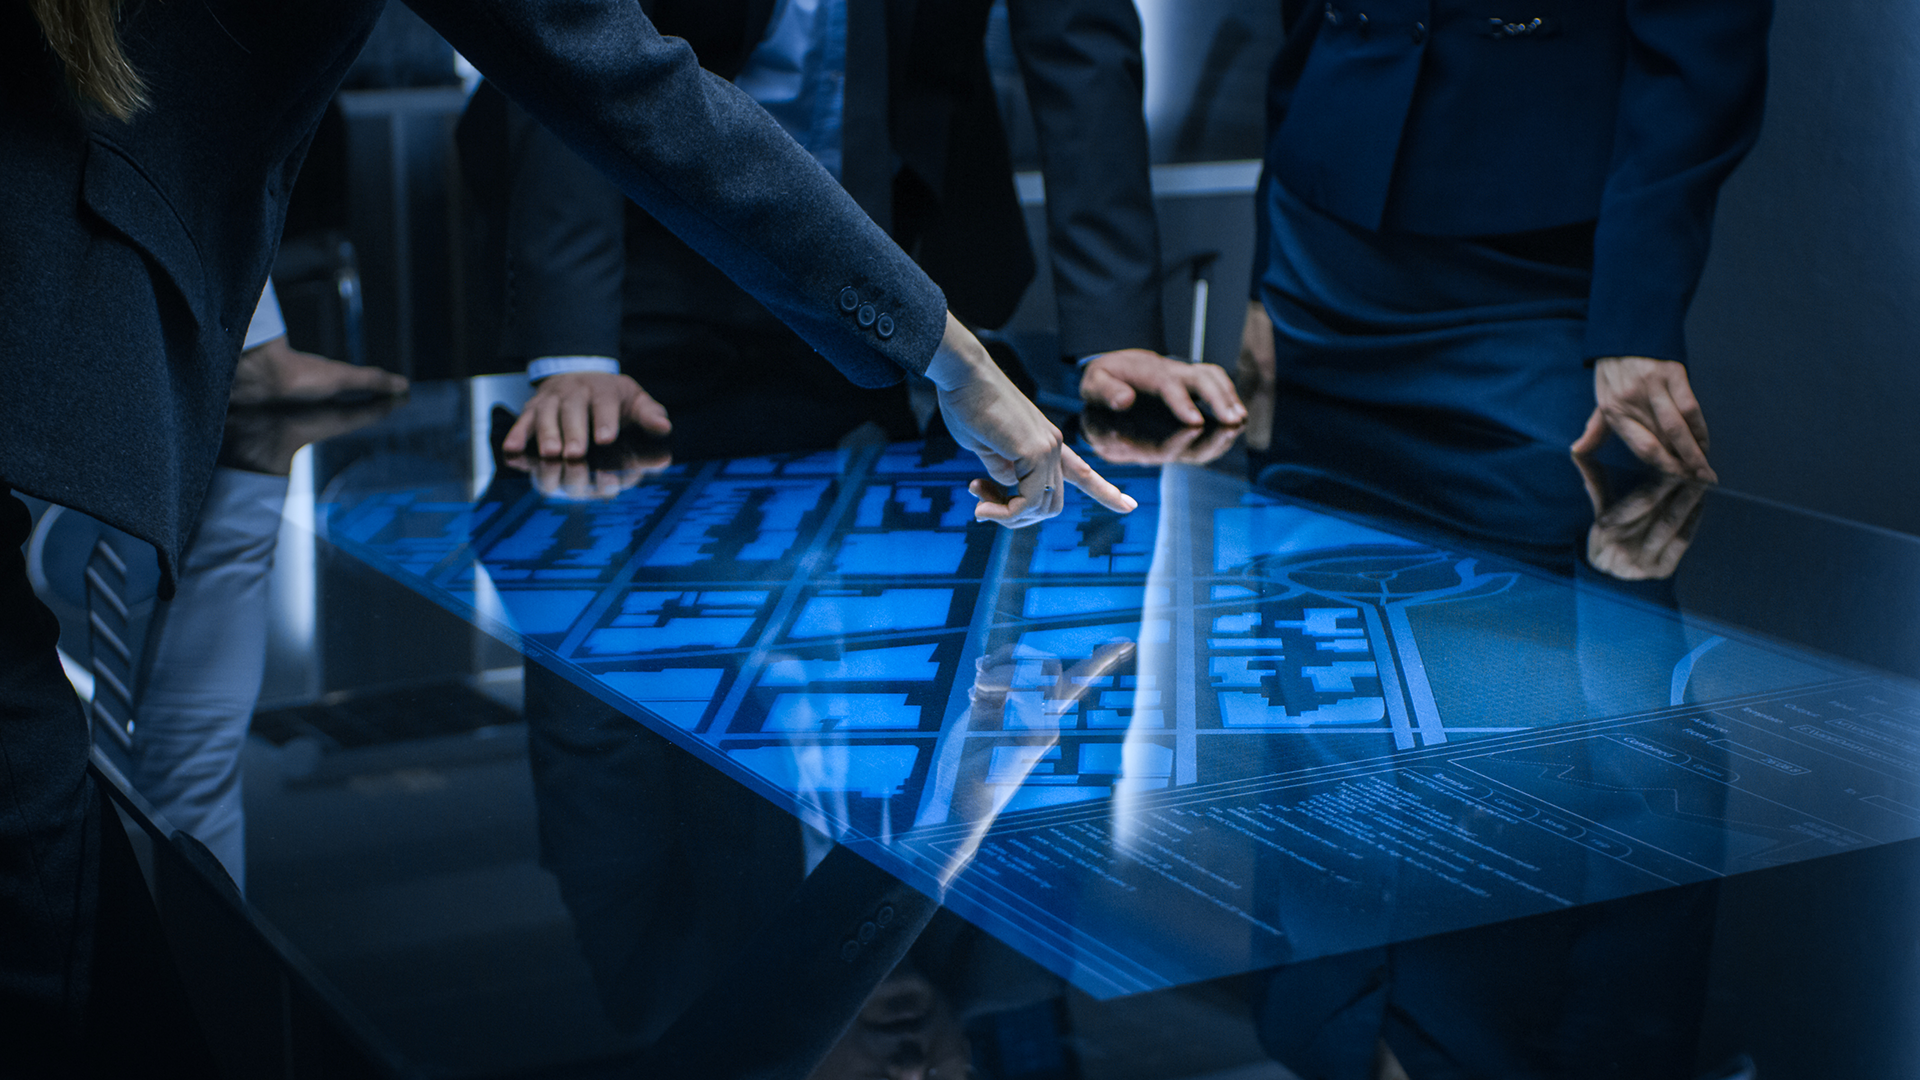 Multi-Touch Tables: An Innovative Approach to Any Business